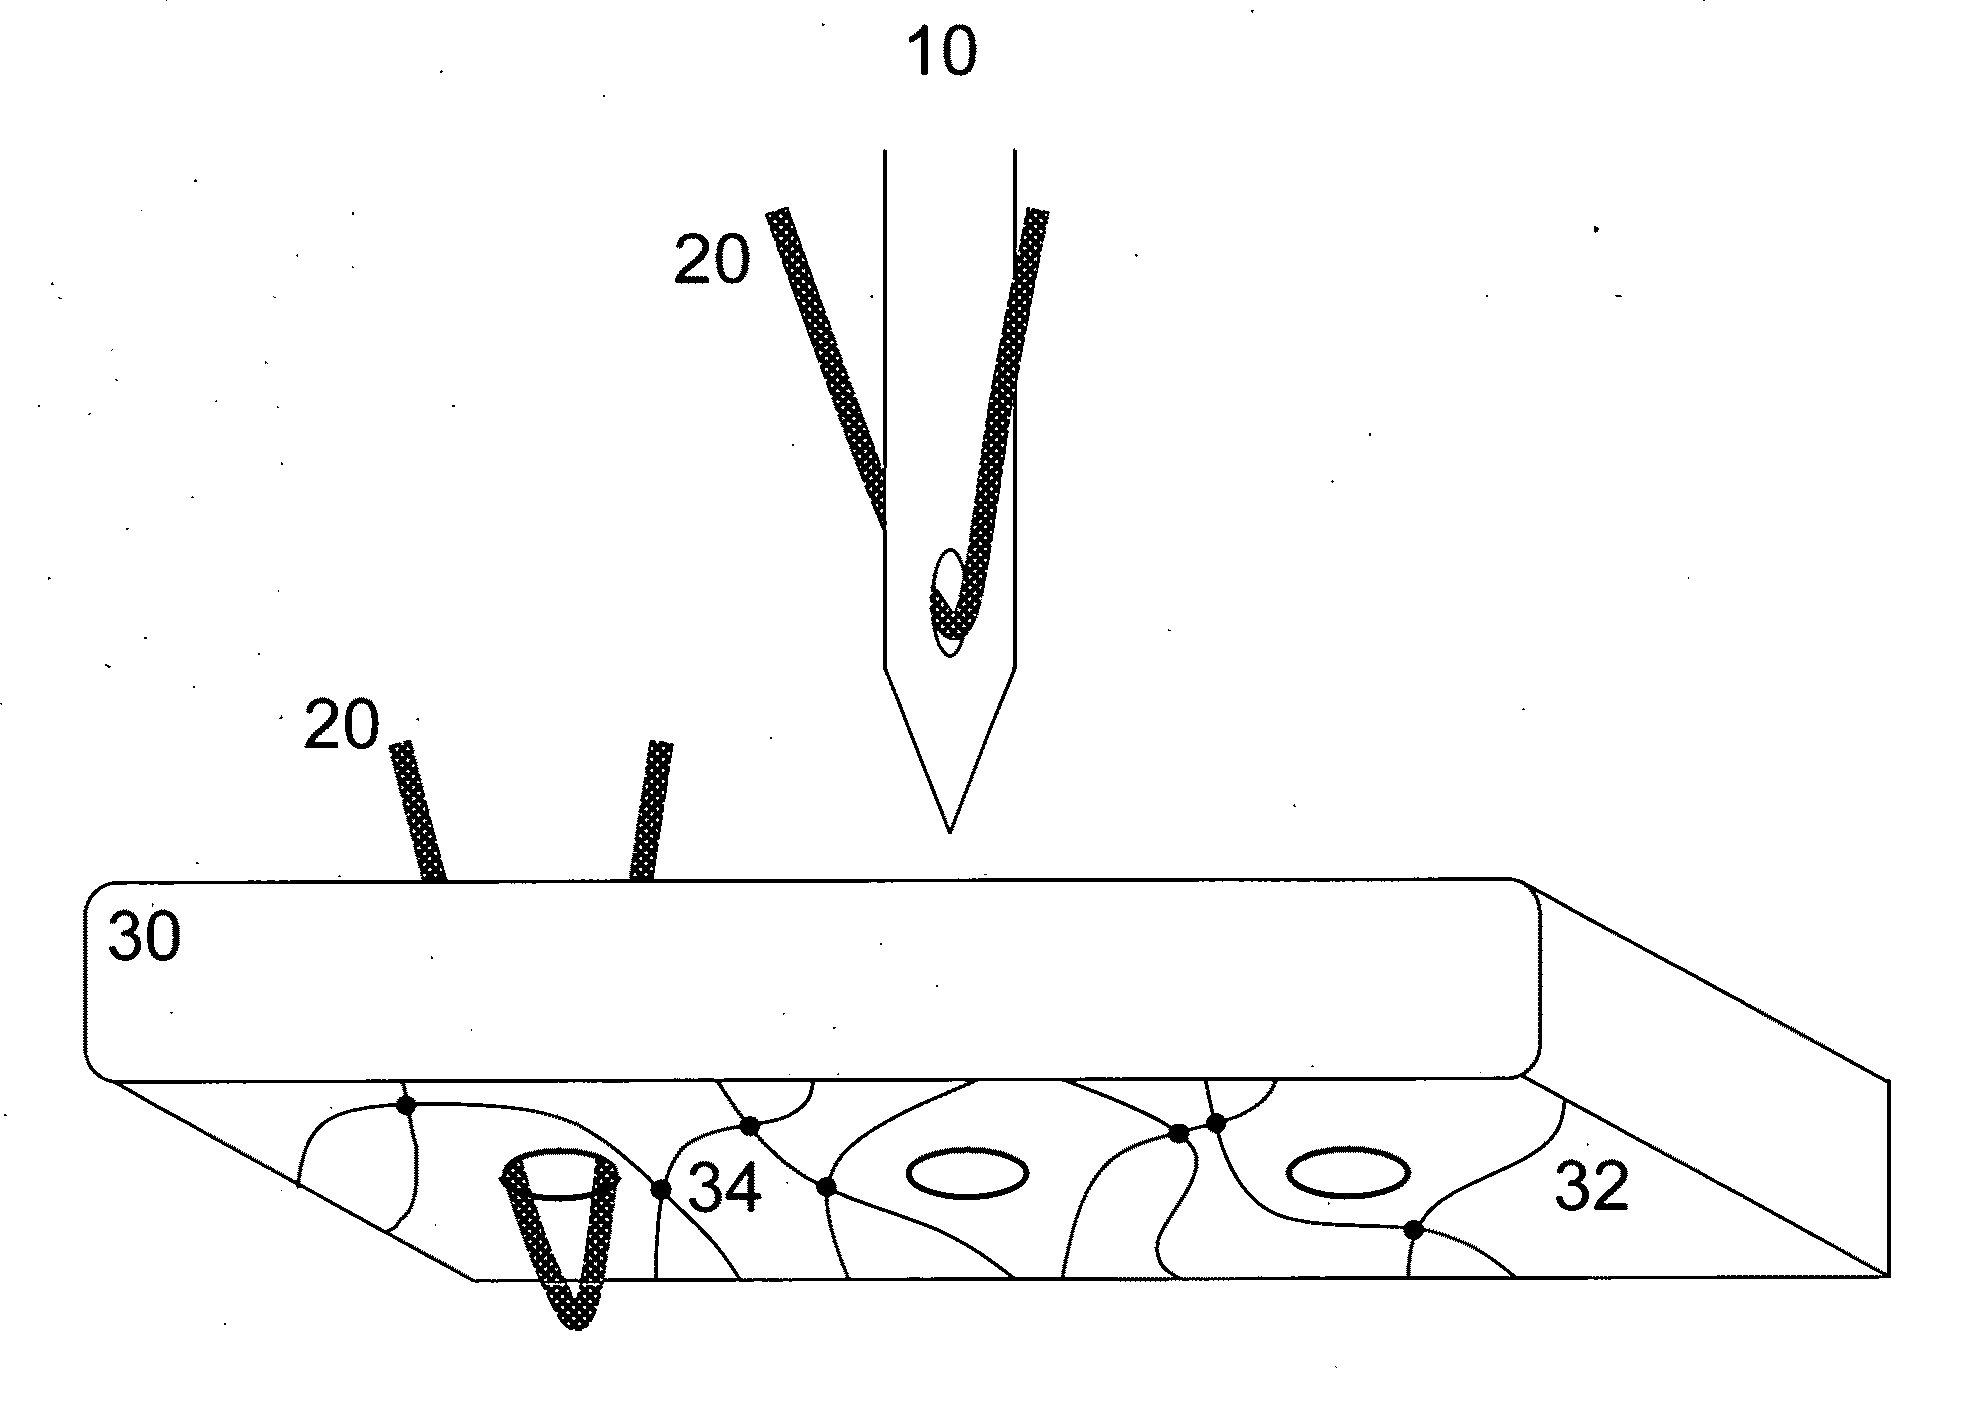 Carpet tile primary backing systems and methods